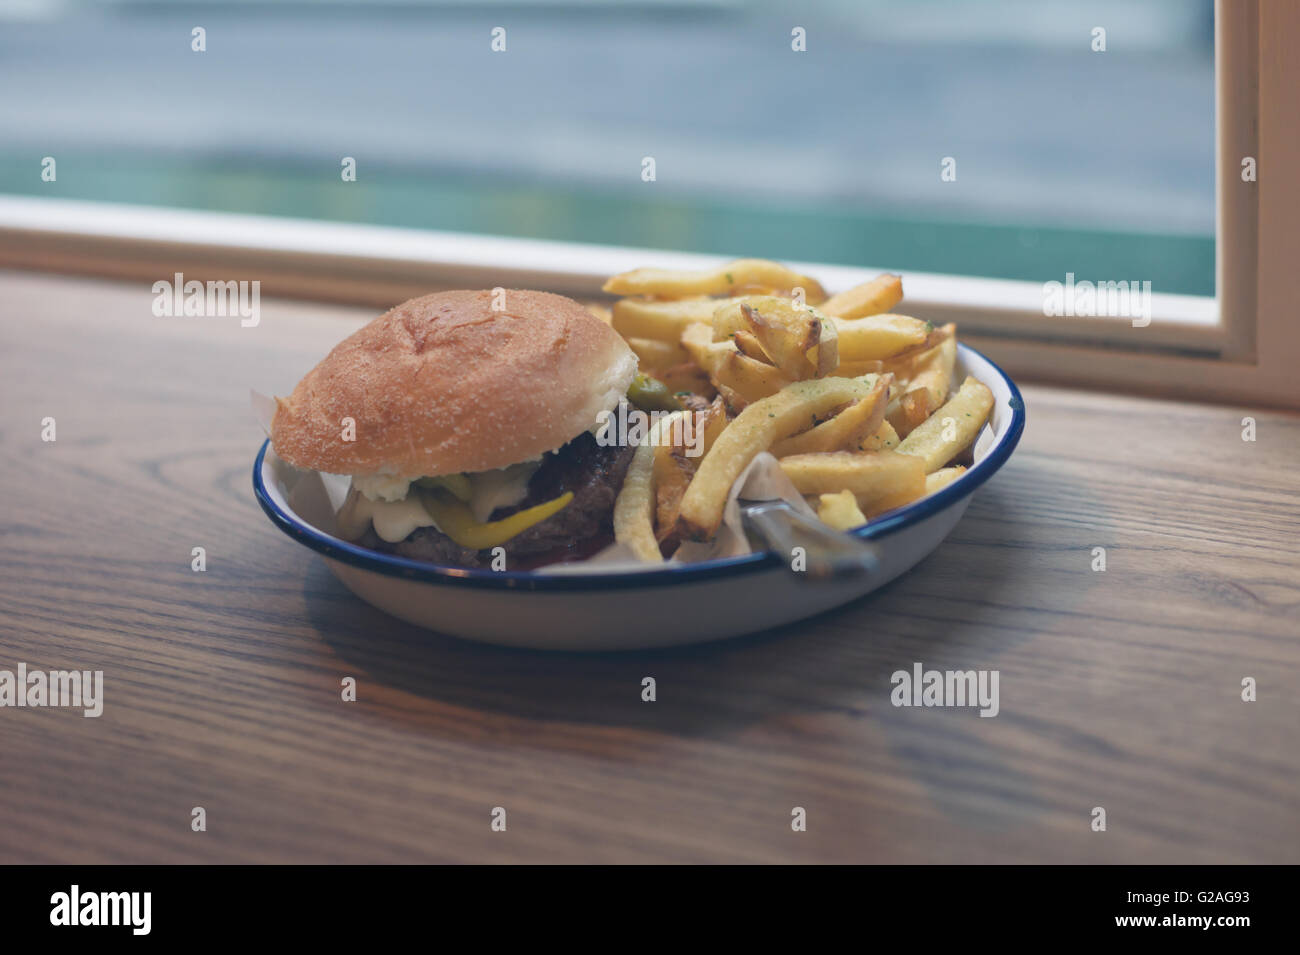 A burger and a side of fries on a plate by the window Stock Photo